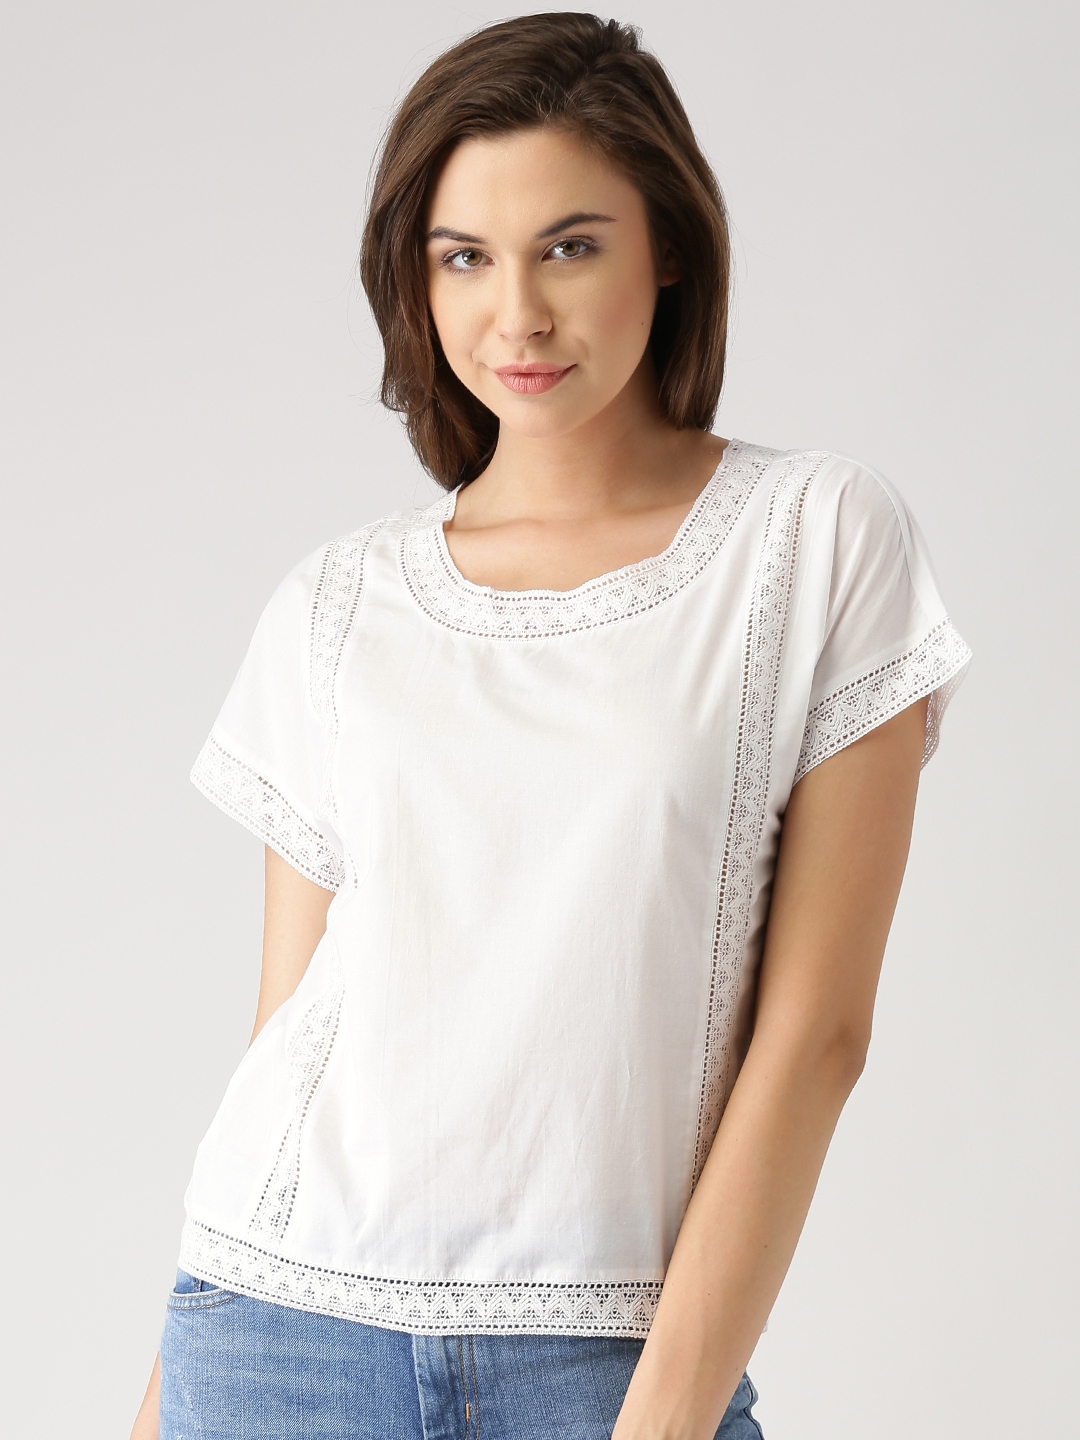 Buy Marie Claire Women White Solid Top - Tops for Women 1853721 | Myntra